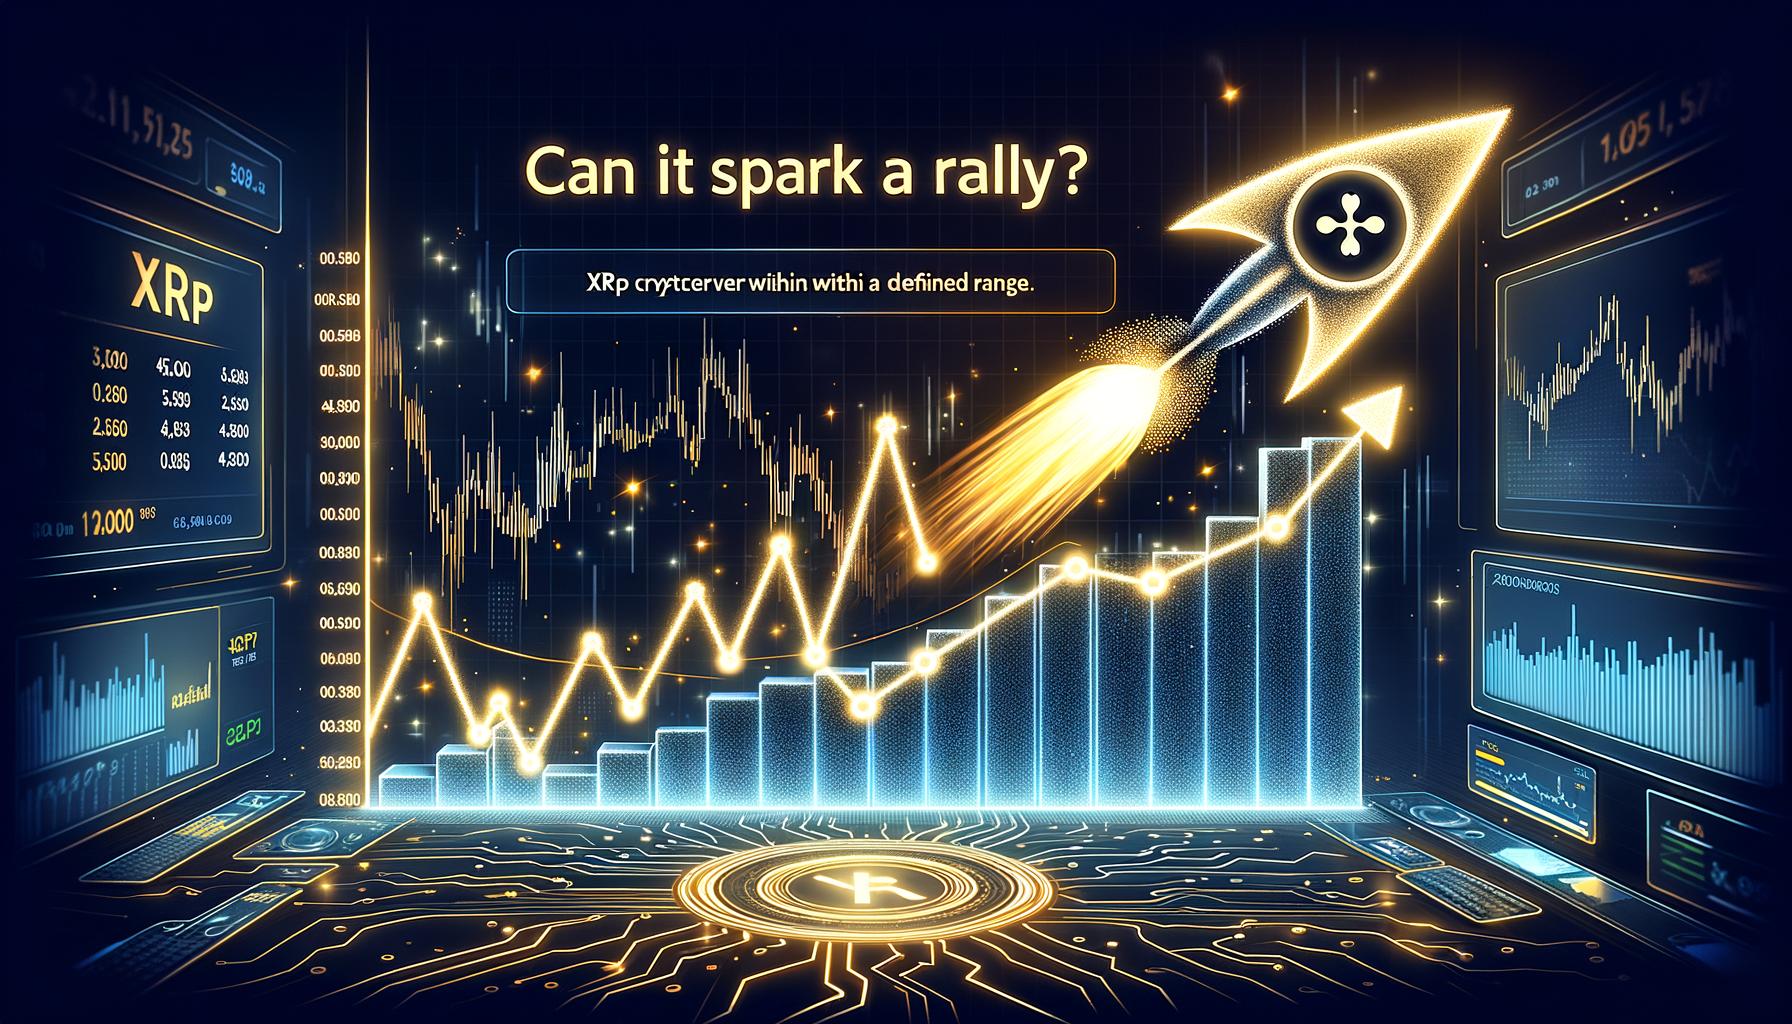 XRP Price Shows Signs of Recovery Within Range: Can it Spark a Rally?